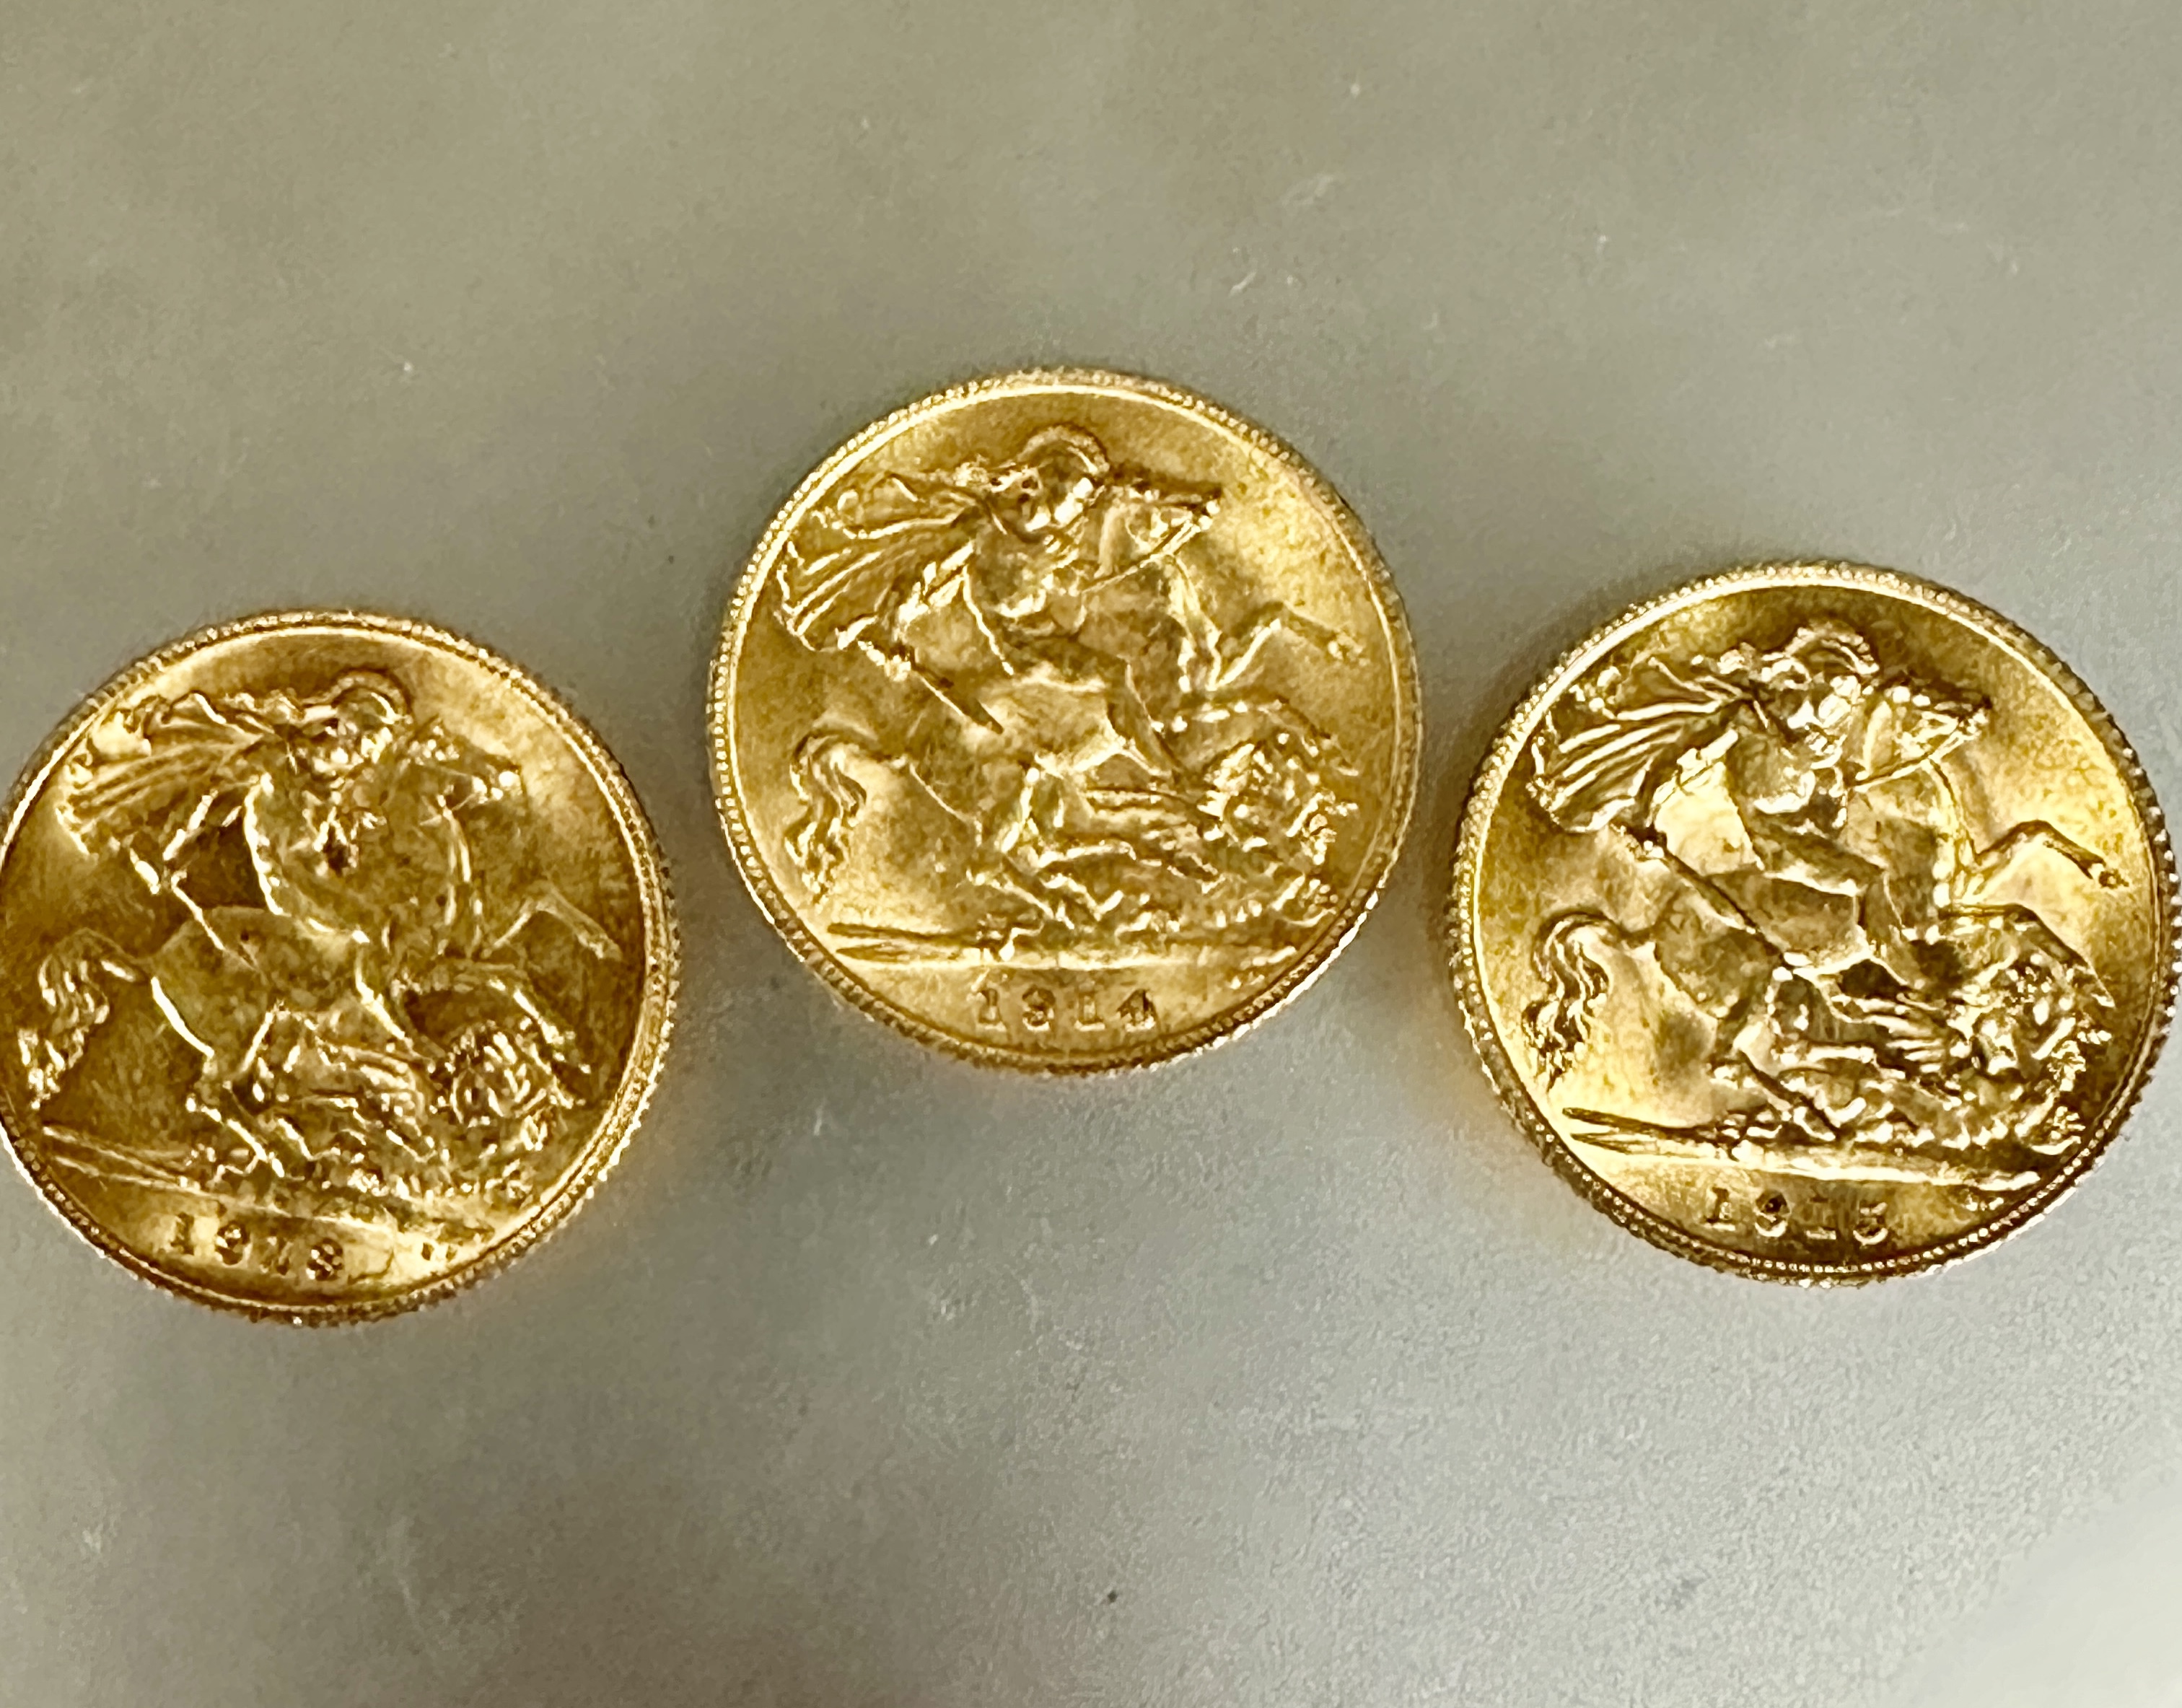 A set of three George V gold half sovereigns 1913,1914 and 1915 (3) 12.05g - Image 2 of 2